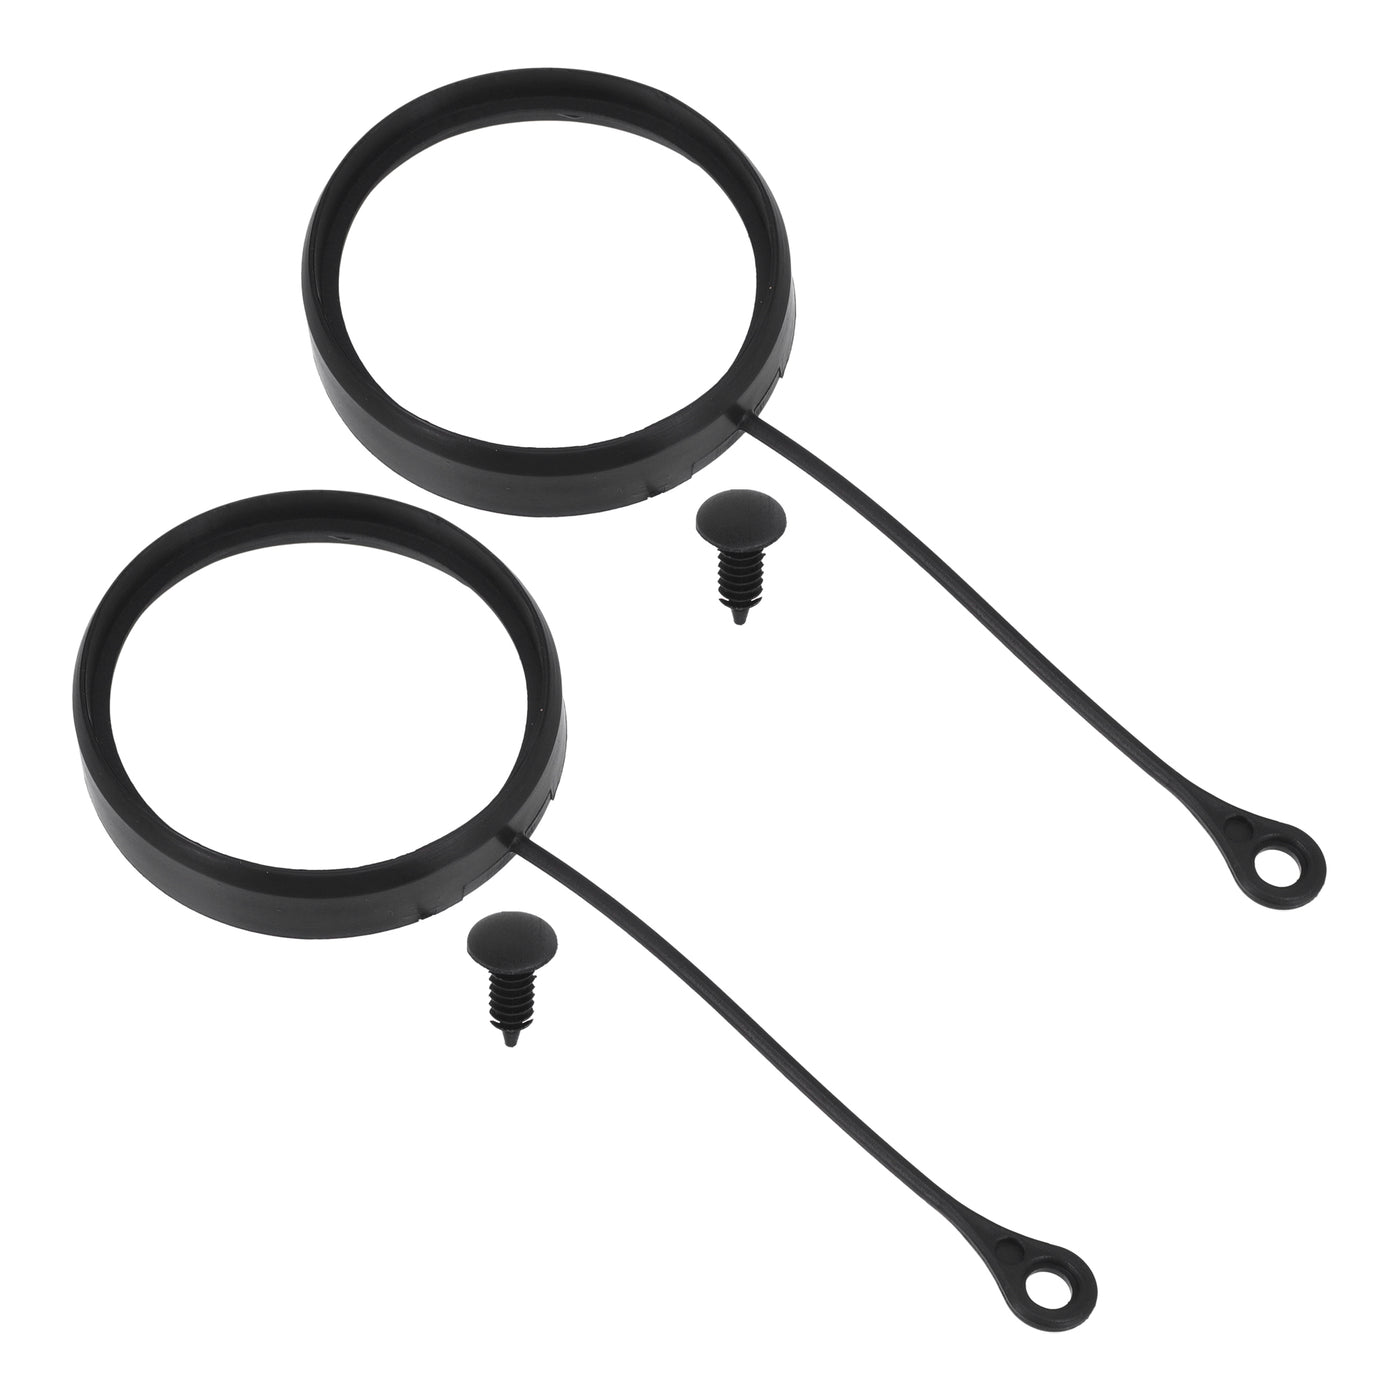 ACROPIX Fuel Tank Cap Tether Fuel Tank Rope Replacement Fit for Mercedes-Benz E320 2003-2005 No.A2214700605 - Pack of 2